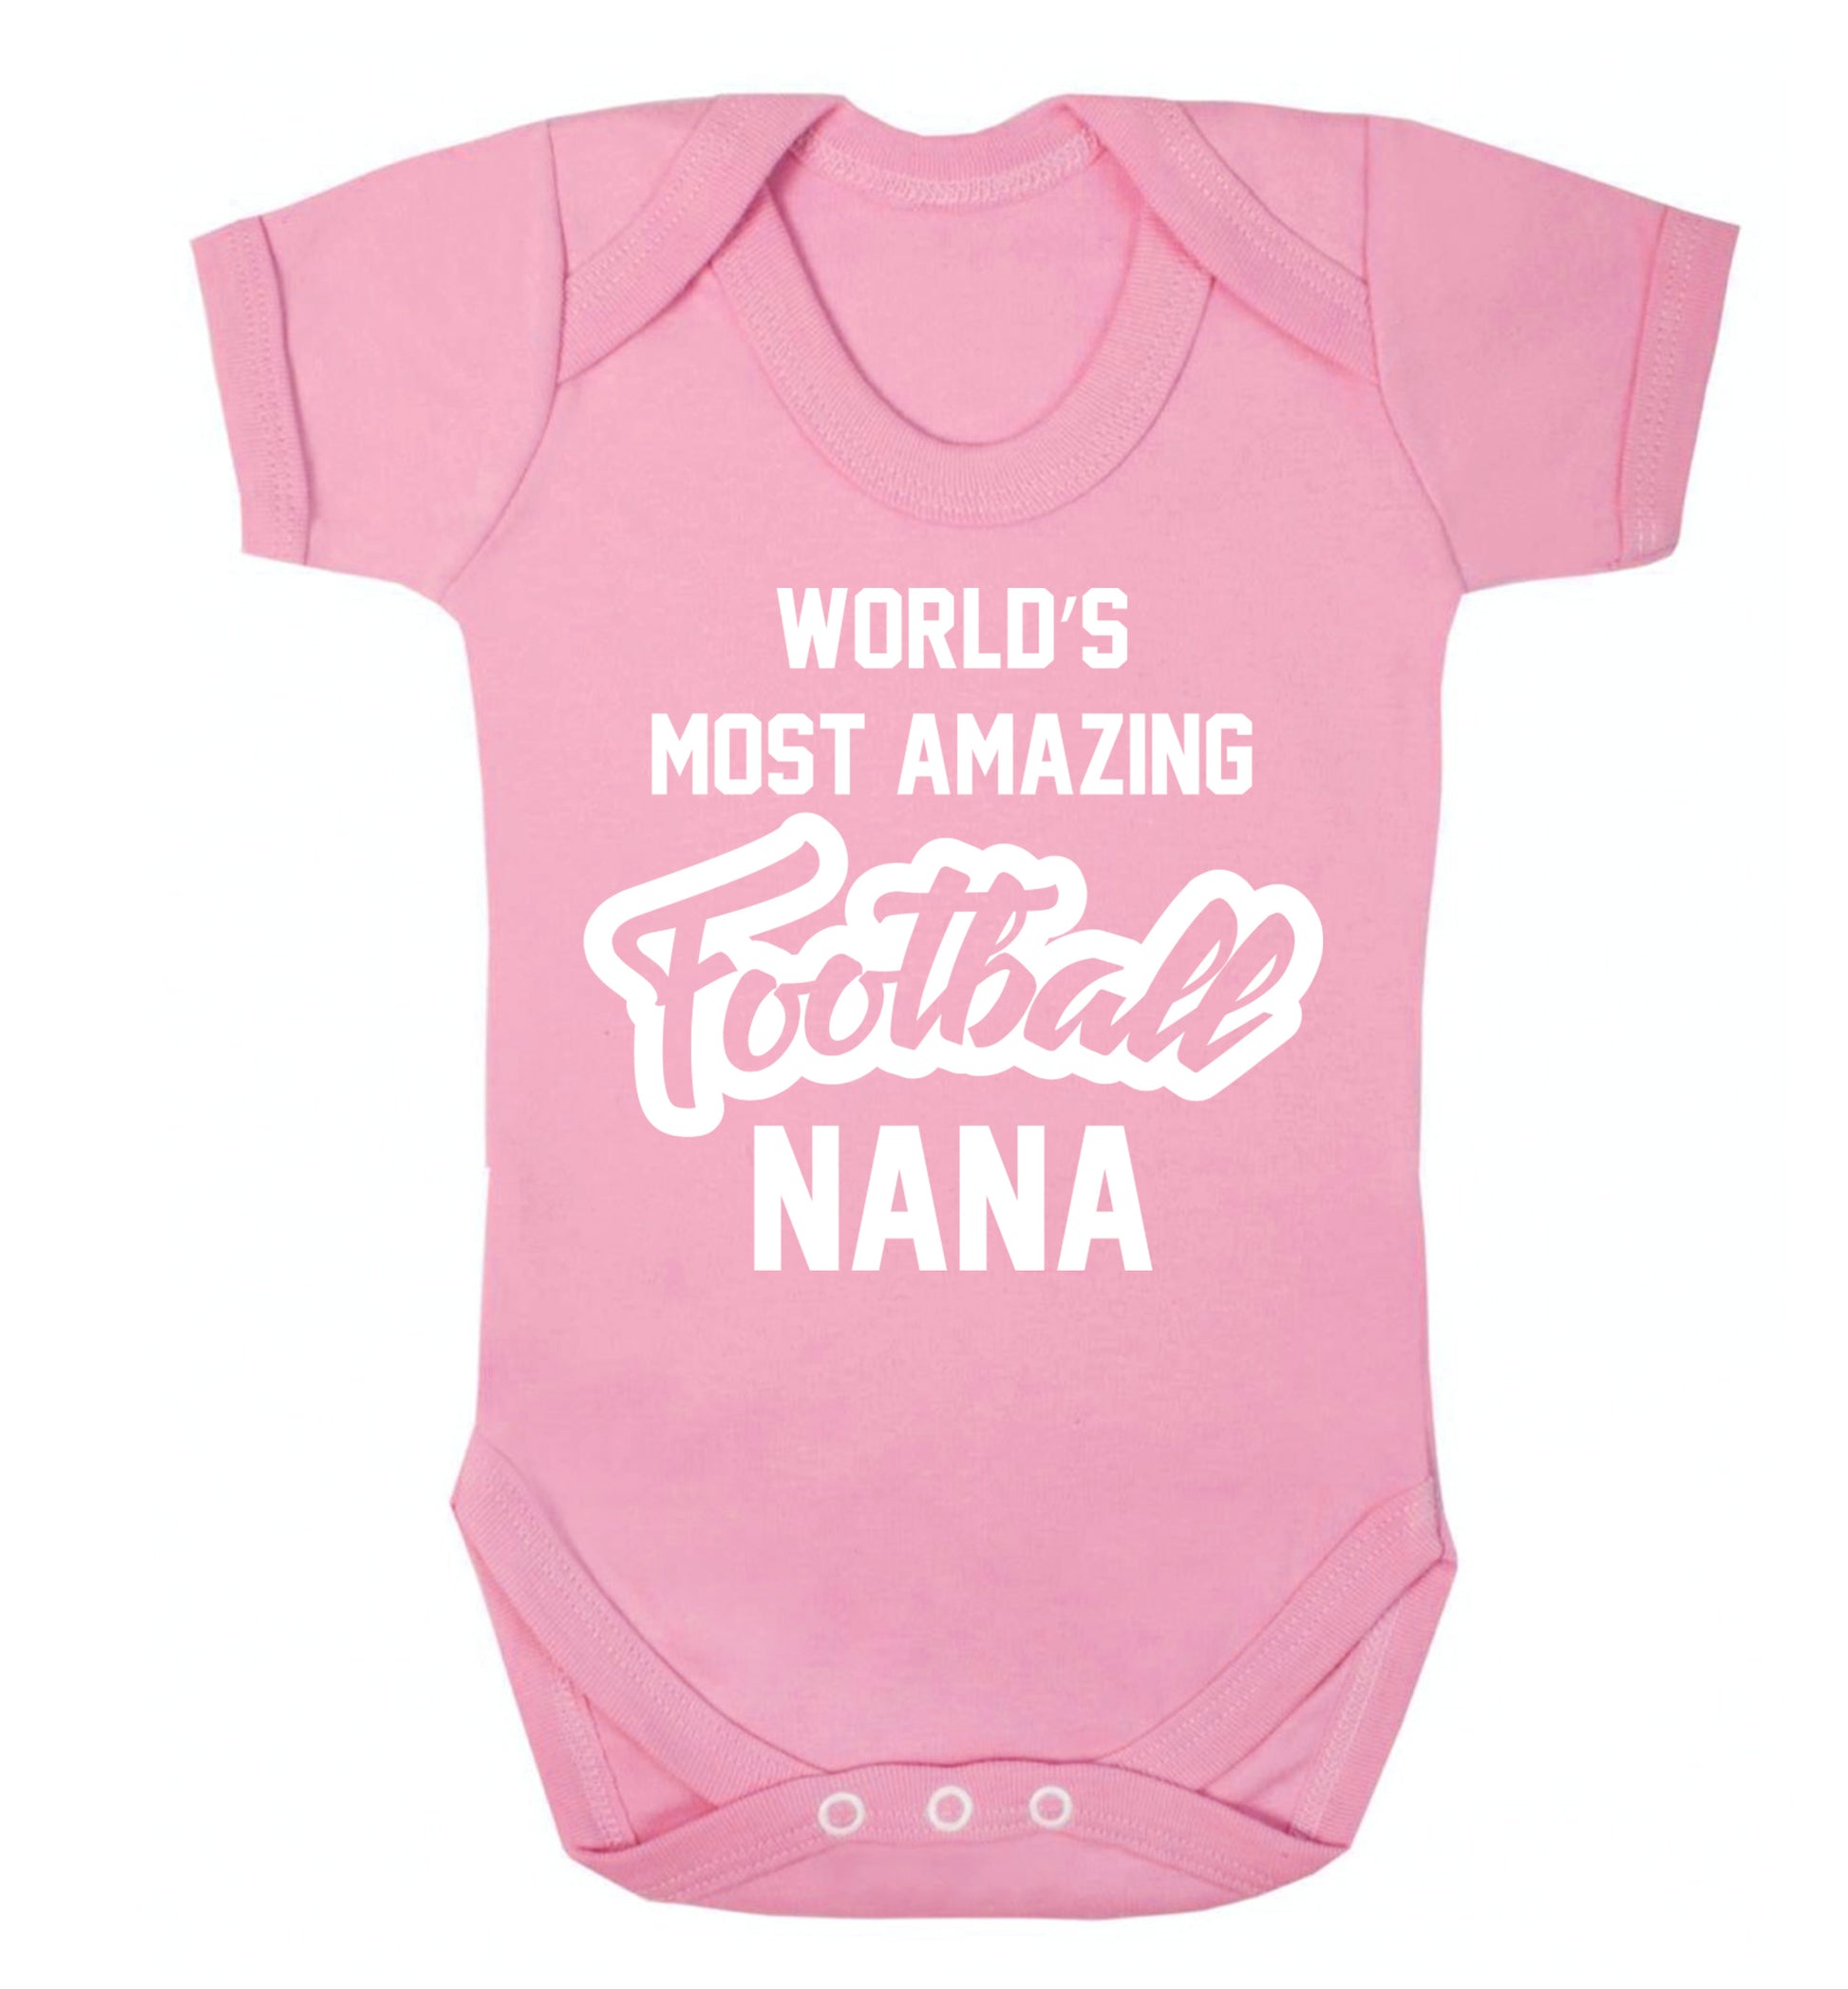 Worlds most amazing football nana Baby Vest pale pink 18-24 months